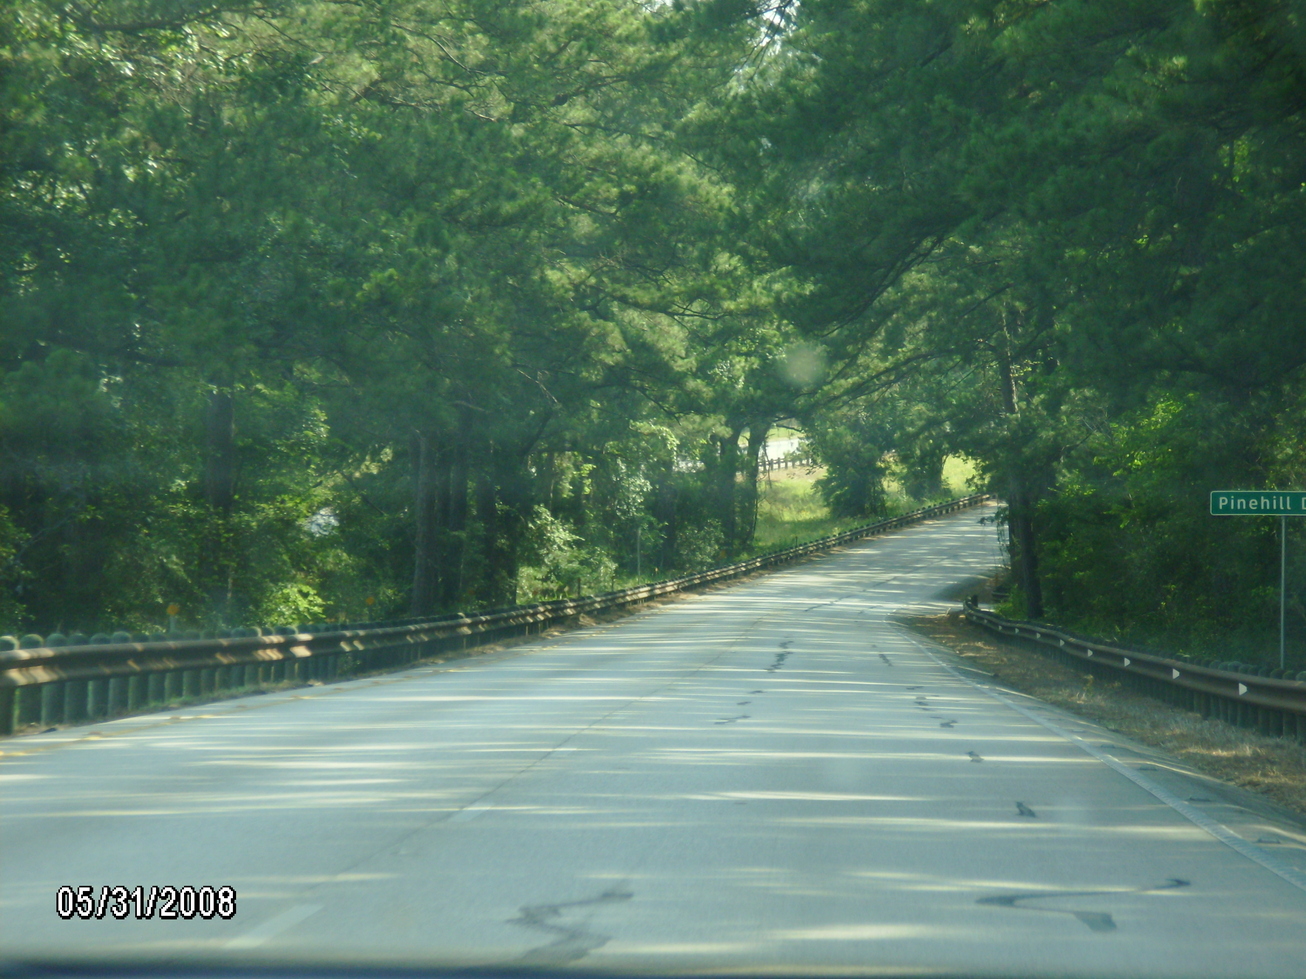 Bastrop, TX: Another beautiful shot of the long stretch of Lost Pines